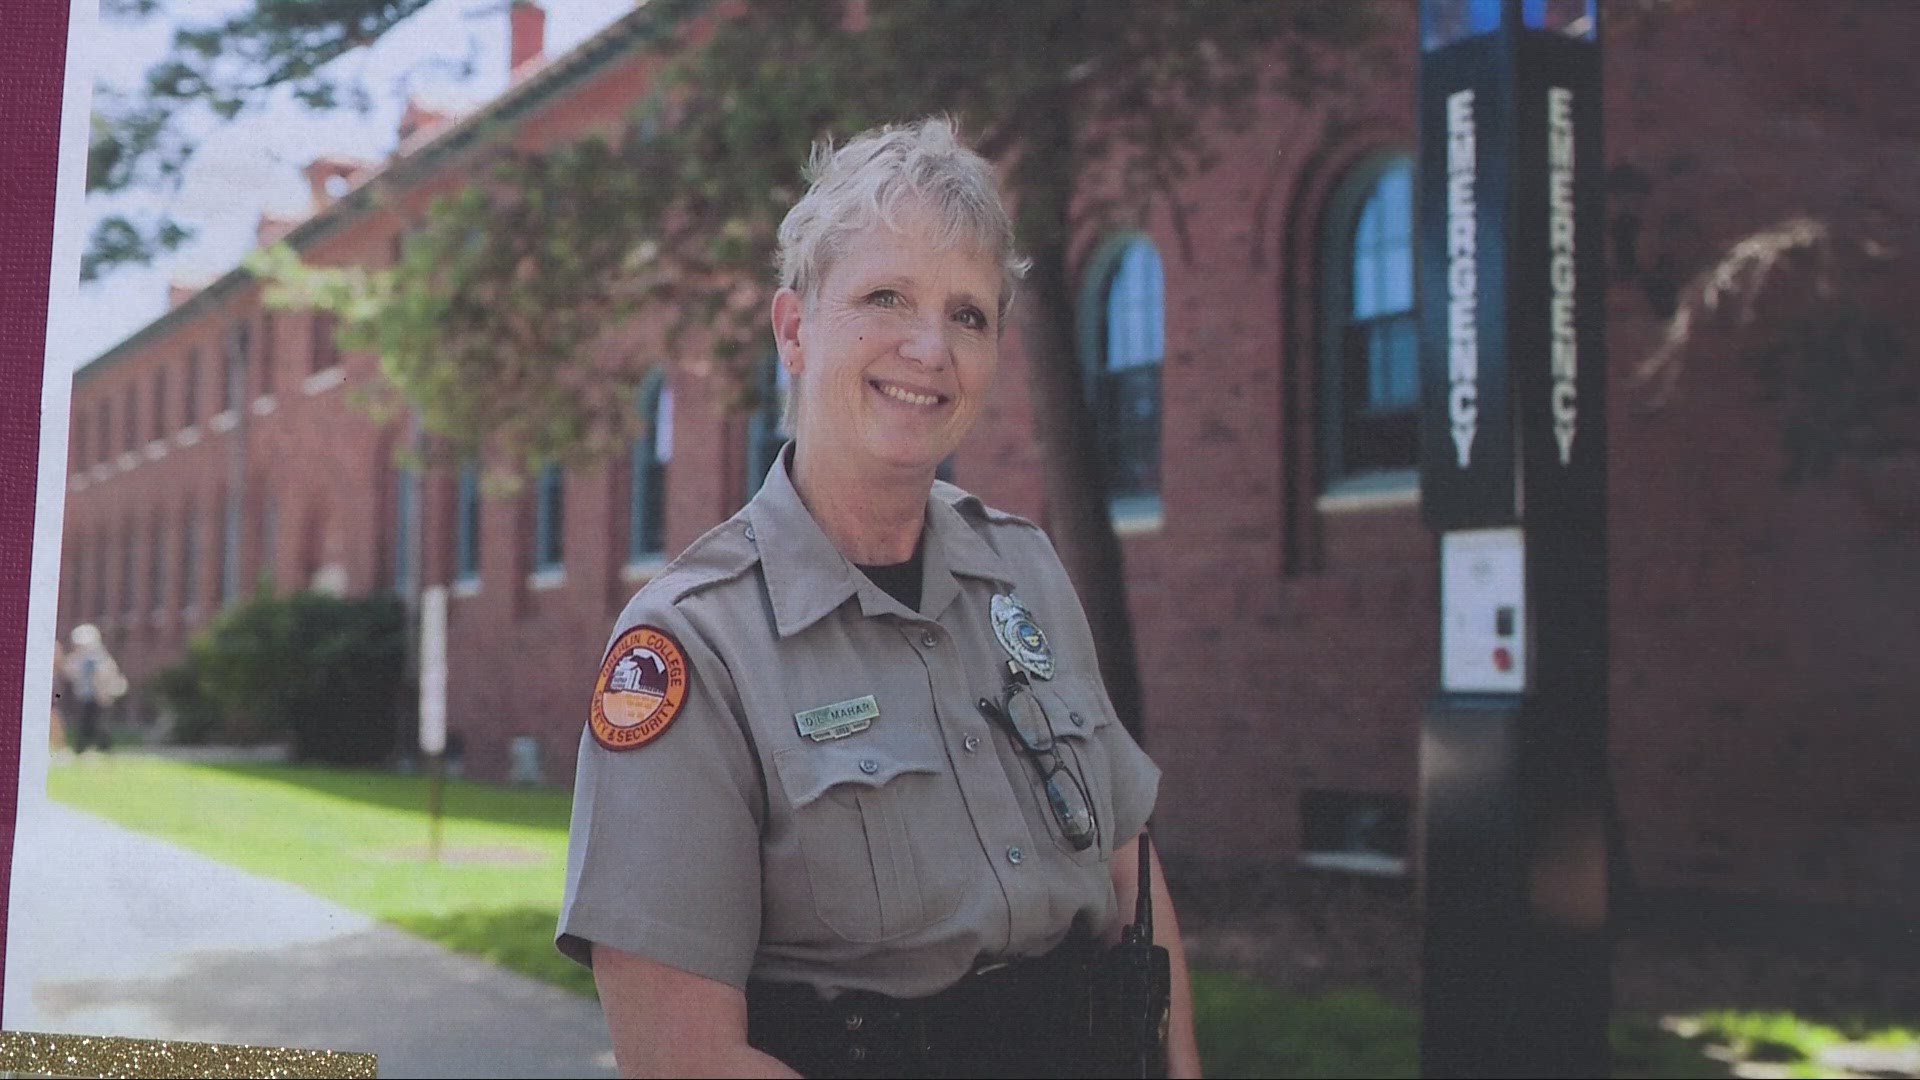 In 1977, Dianne made history by becoming the first woman to join the Ohio State Highway Patrol.